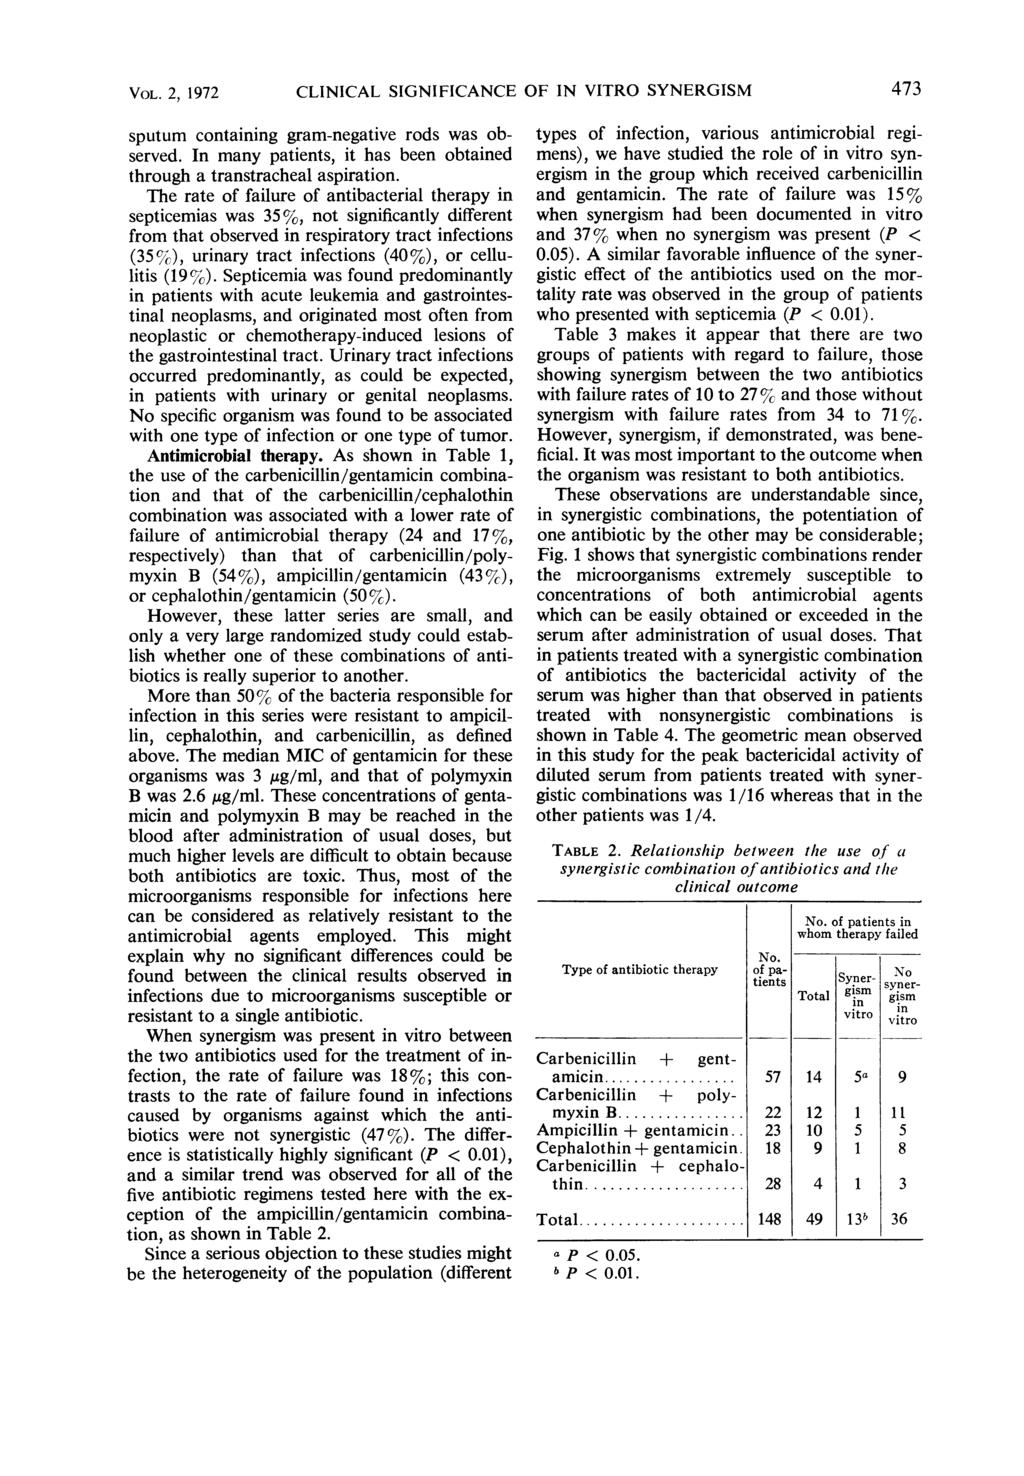 VOL. 2, 1972 CLINICAL SIGNIFICANCE OF IN VITO SYNEGISM sputum containing gram-negative rods was observed. In many patients, it has been obtained through a transtracheal aspiration.